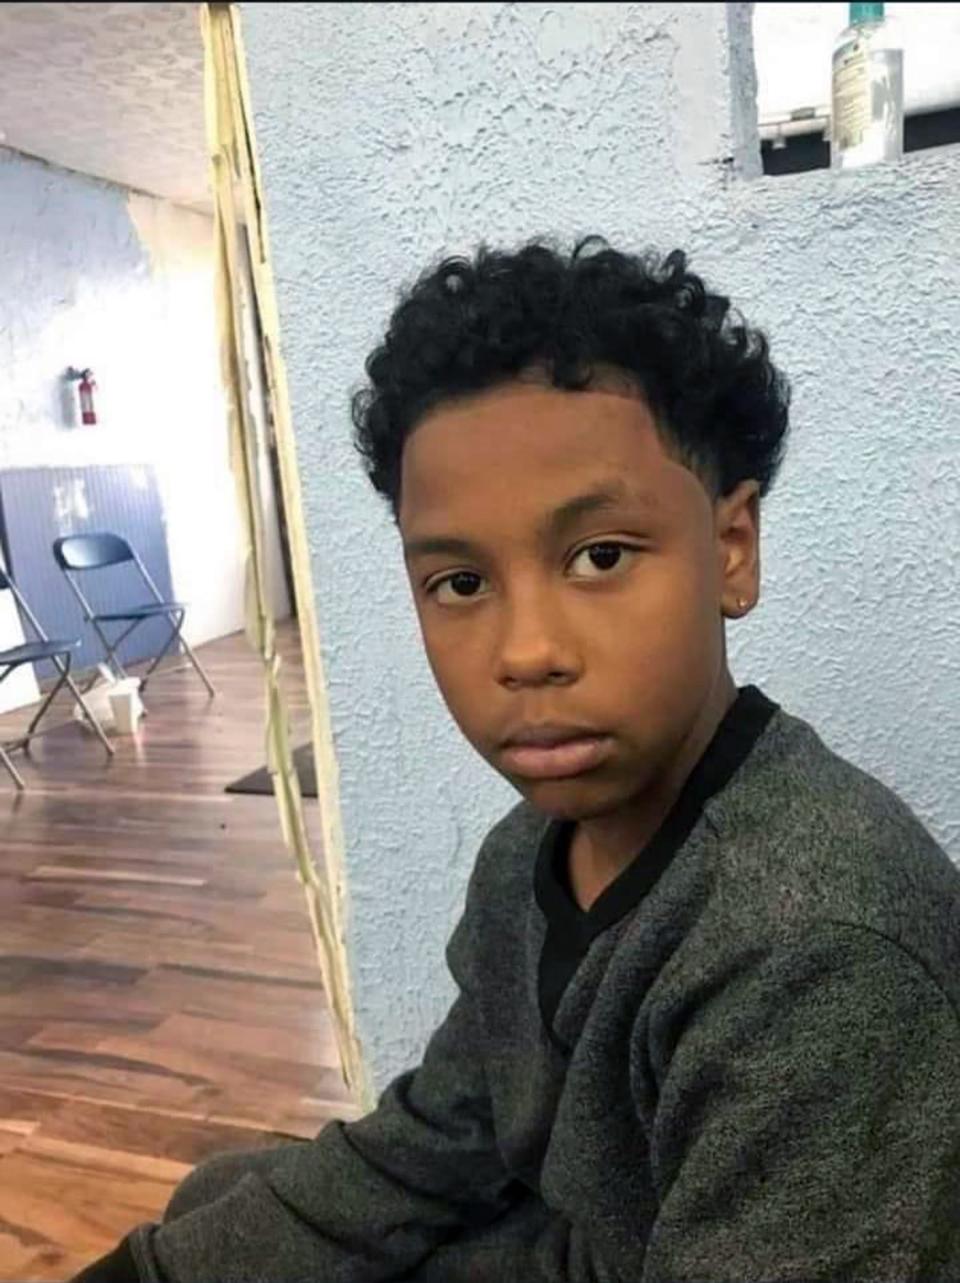 Sinzae Reed, a 13-year-old who was fatally shot in his neighborhood. His sister, 20-year-old Makayla Nichols, said Sinzae was a good kid who didn't deserve to die.